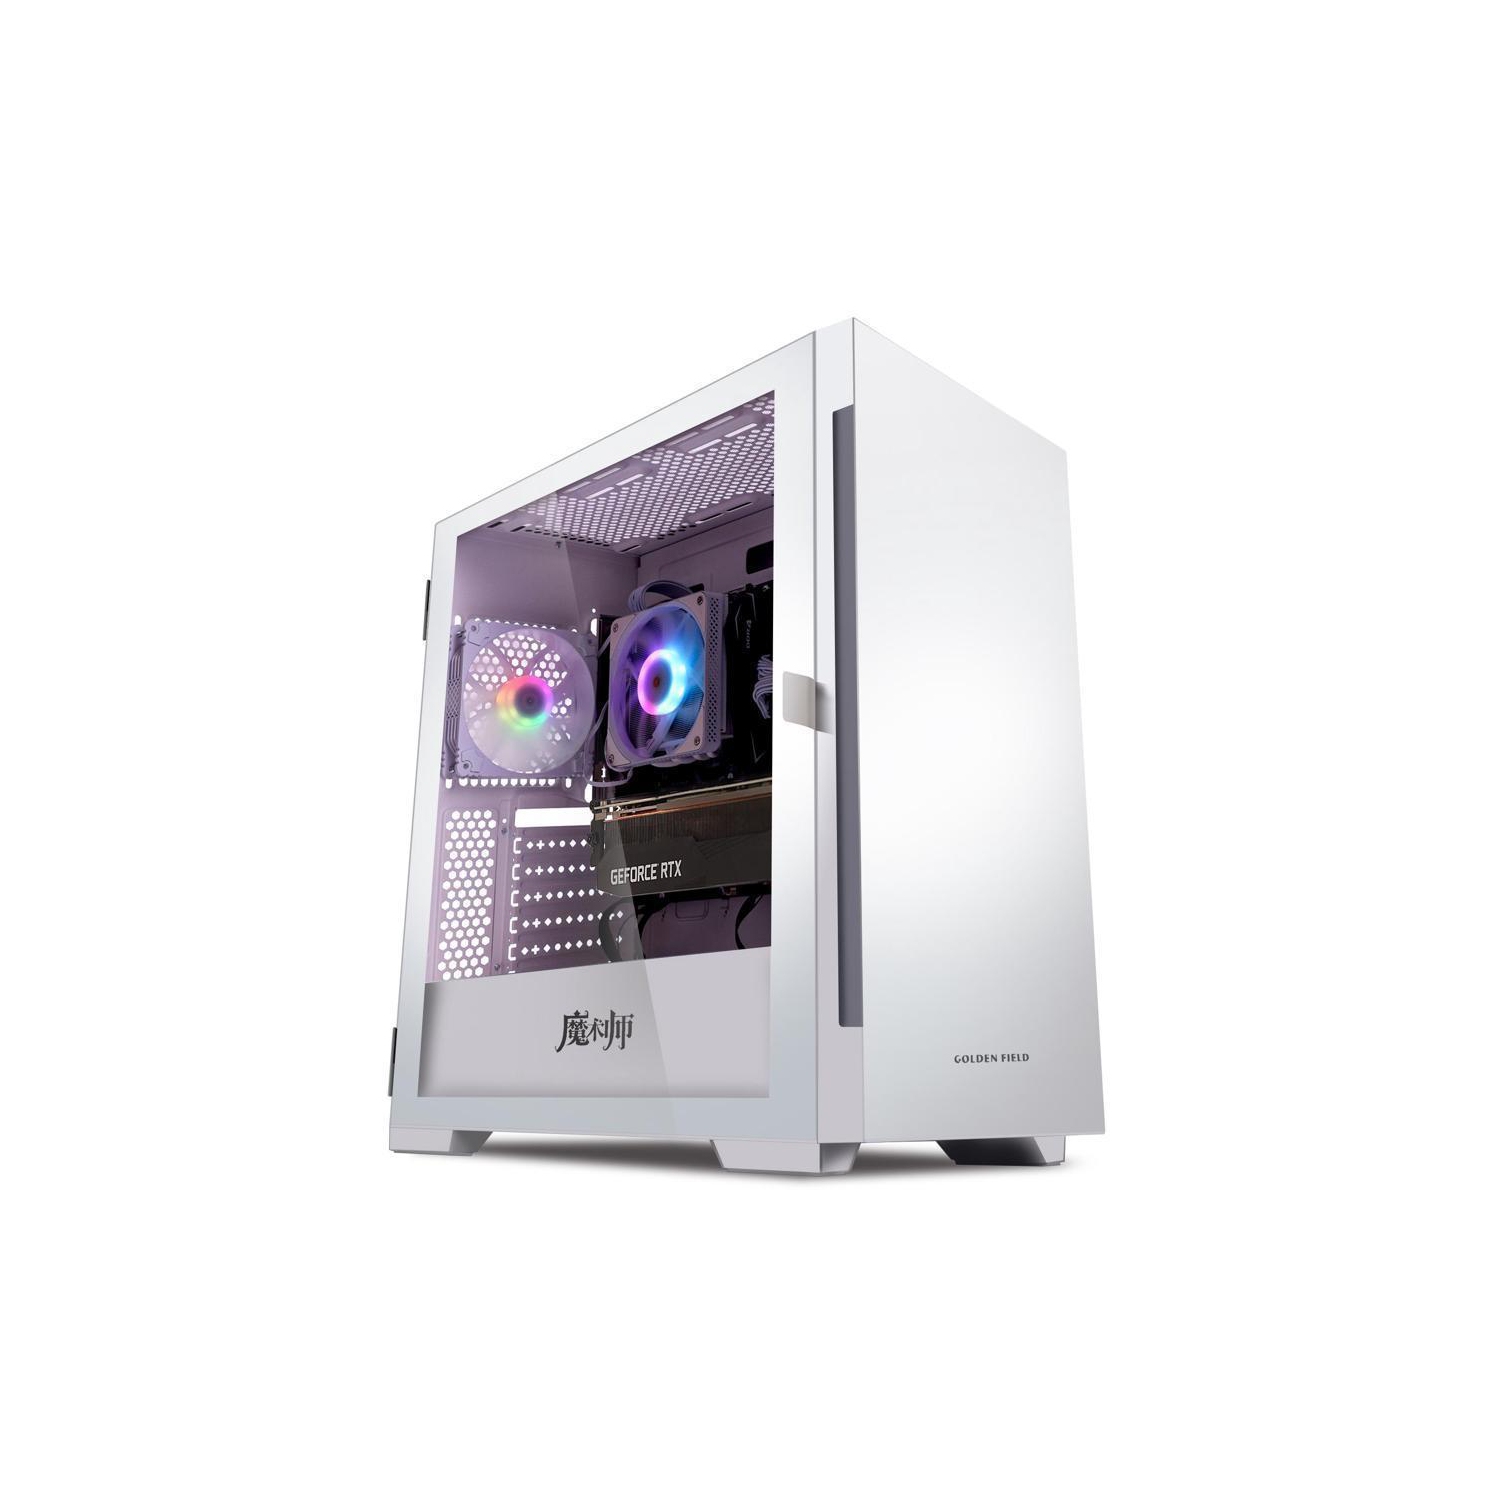 Hoengager Poseidon Gaming - Intel Core i5-12600K 10-Core 3.7GHz-NVIDIA GeForce RTX 3060 - 16GB DDR4 3200MHz - 500GB M.2 NVMe SSD- WIFI -RGB Fans - Windows 11 Pro Computer-White